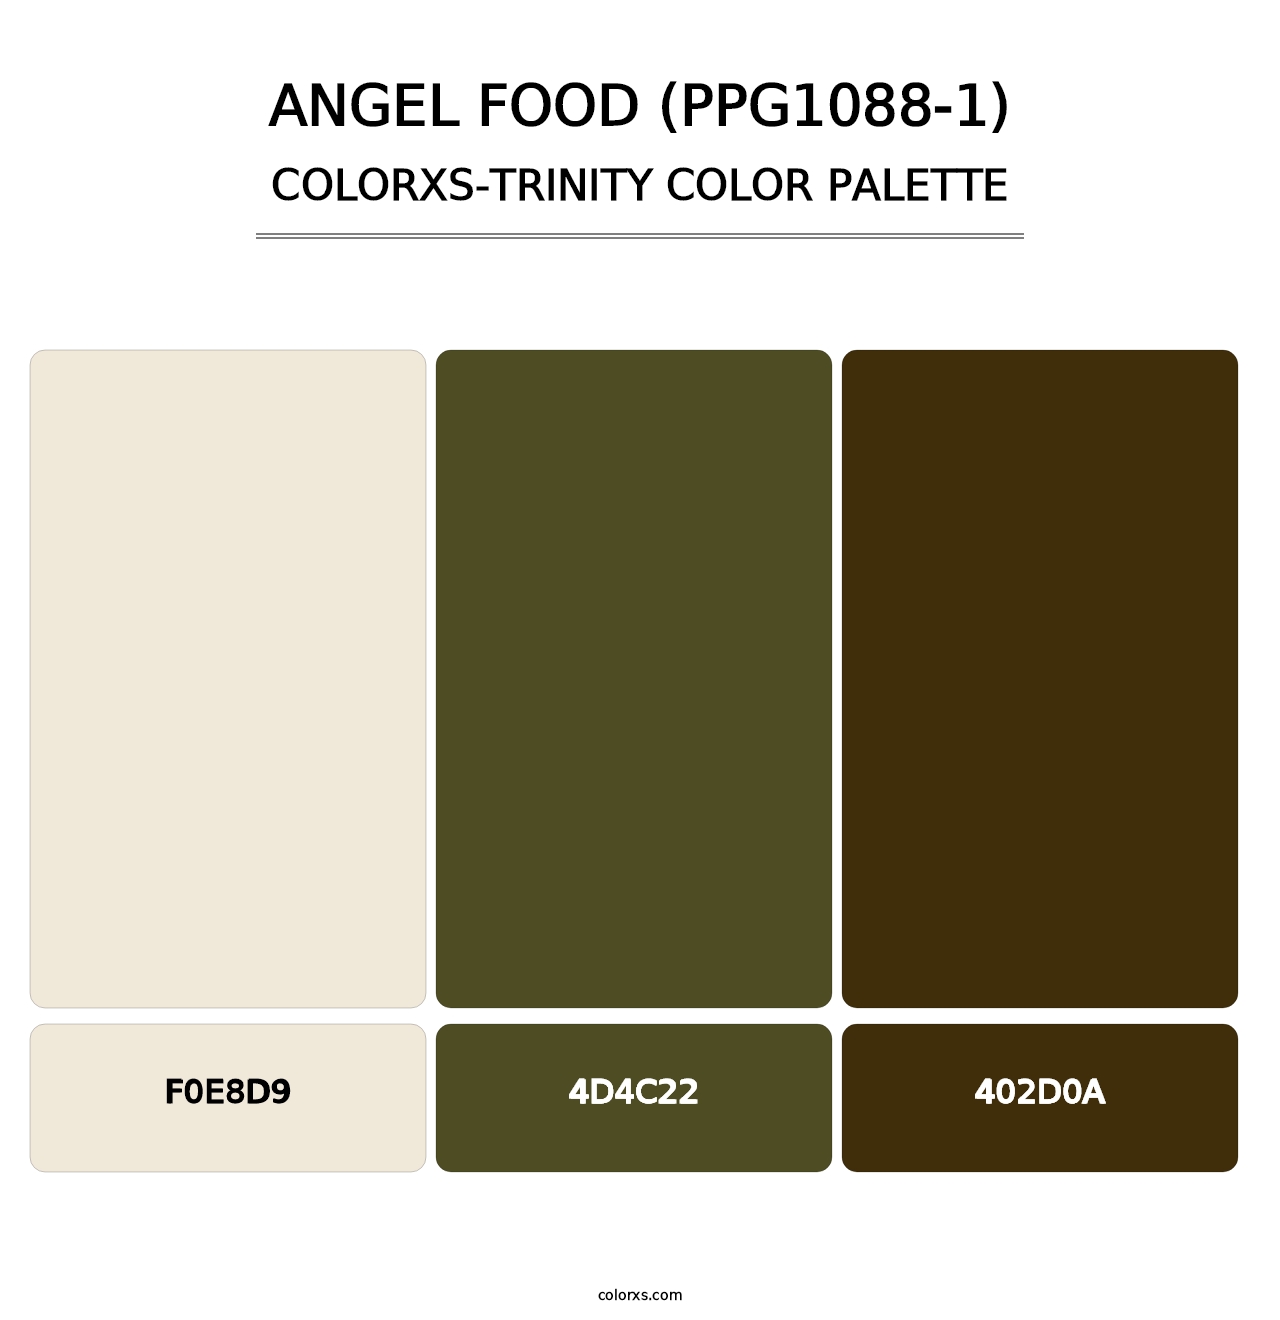 Angel Food (PPG1088-1) - Colorxs Trinity Palette